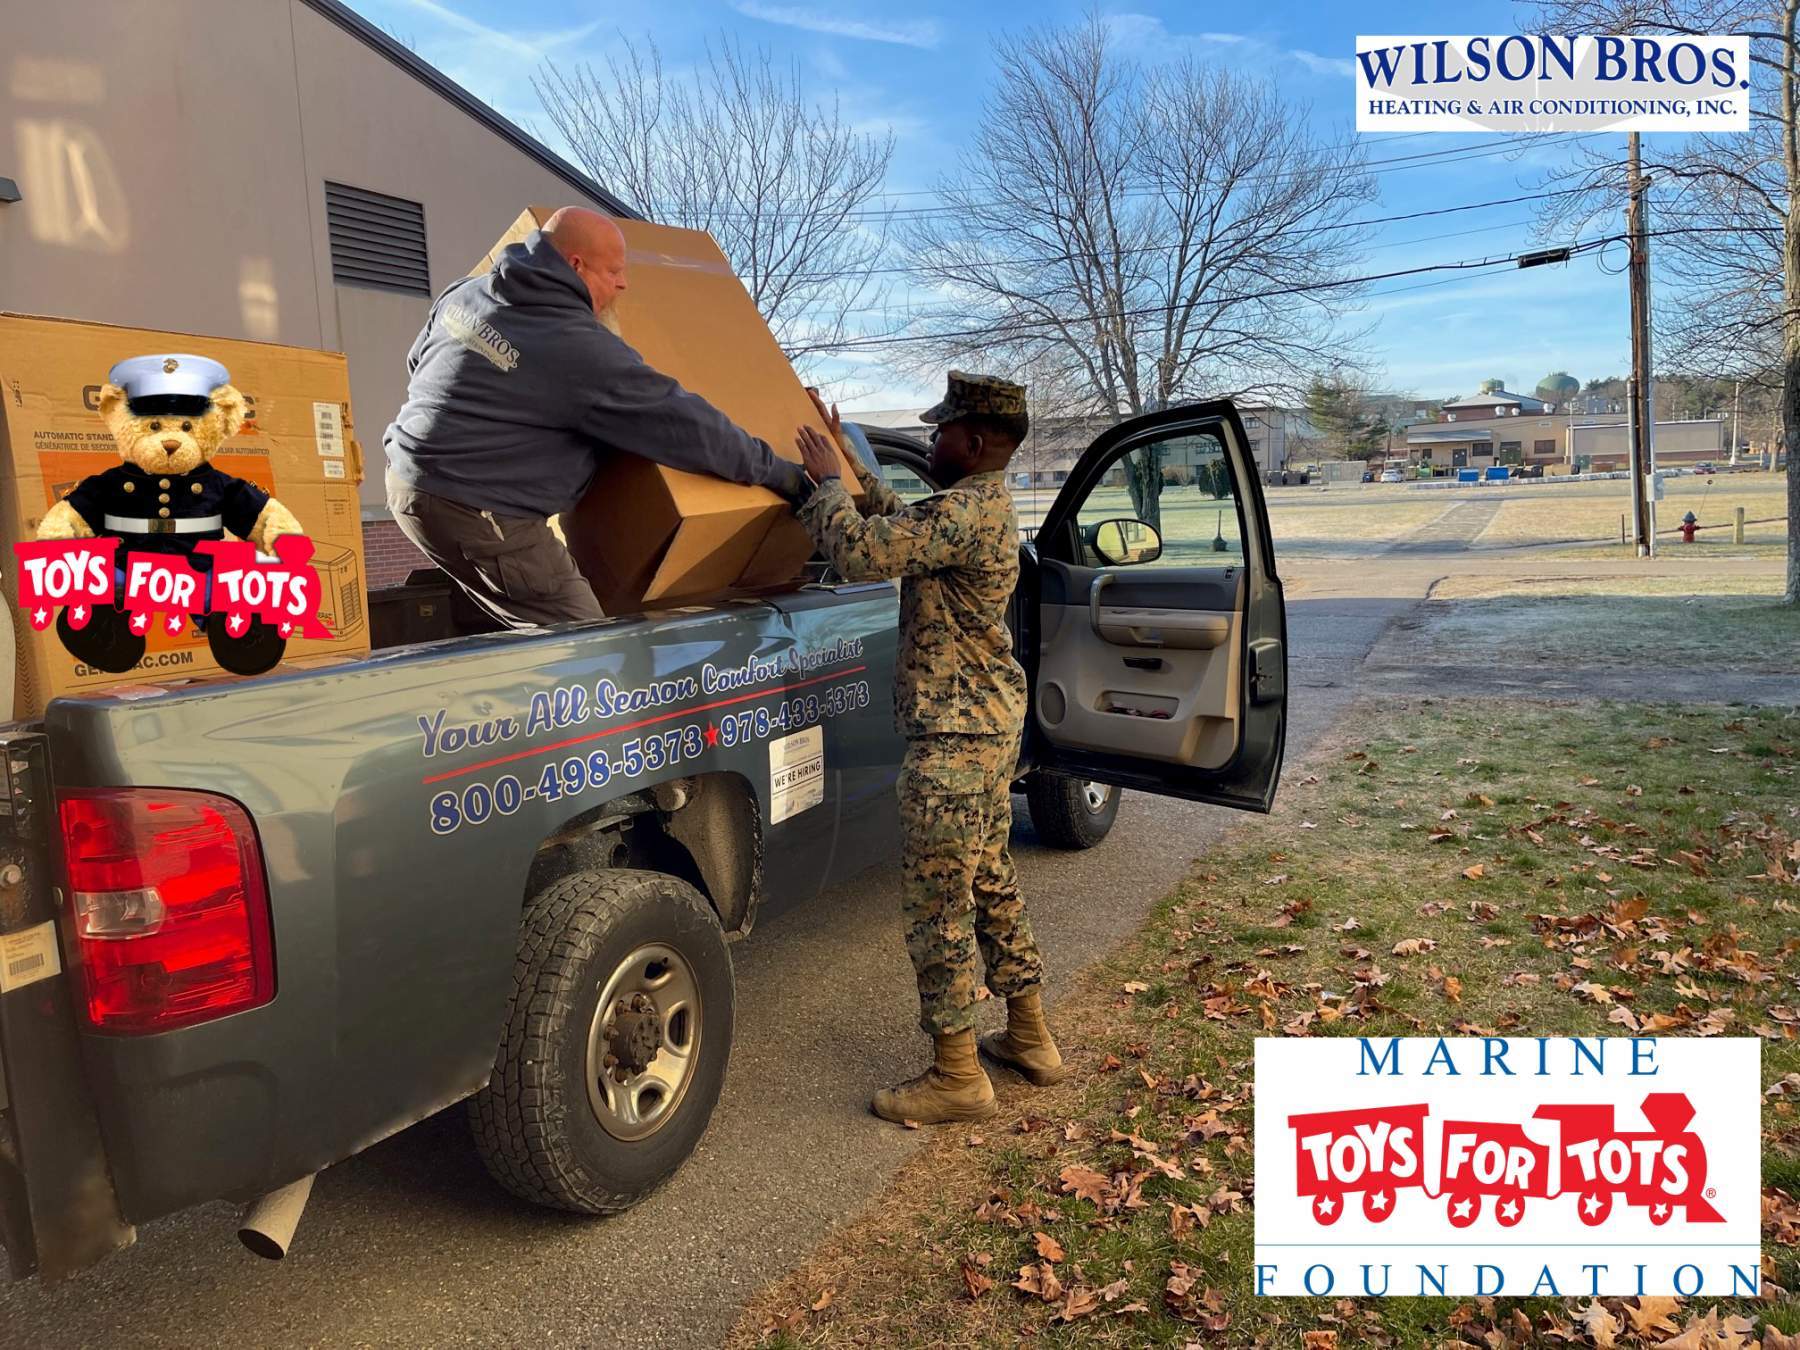 Update on Marine Toys for Tots